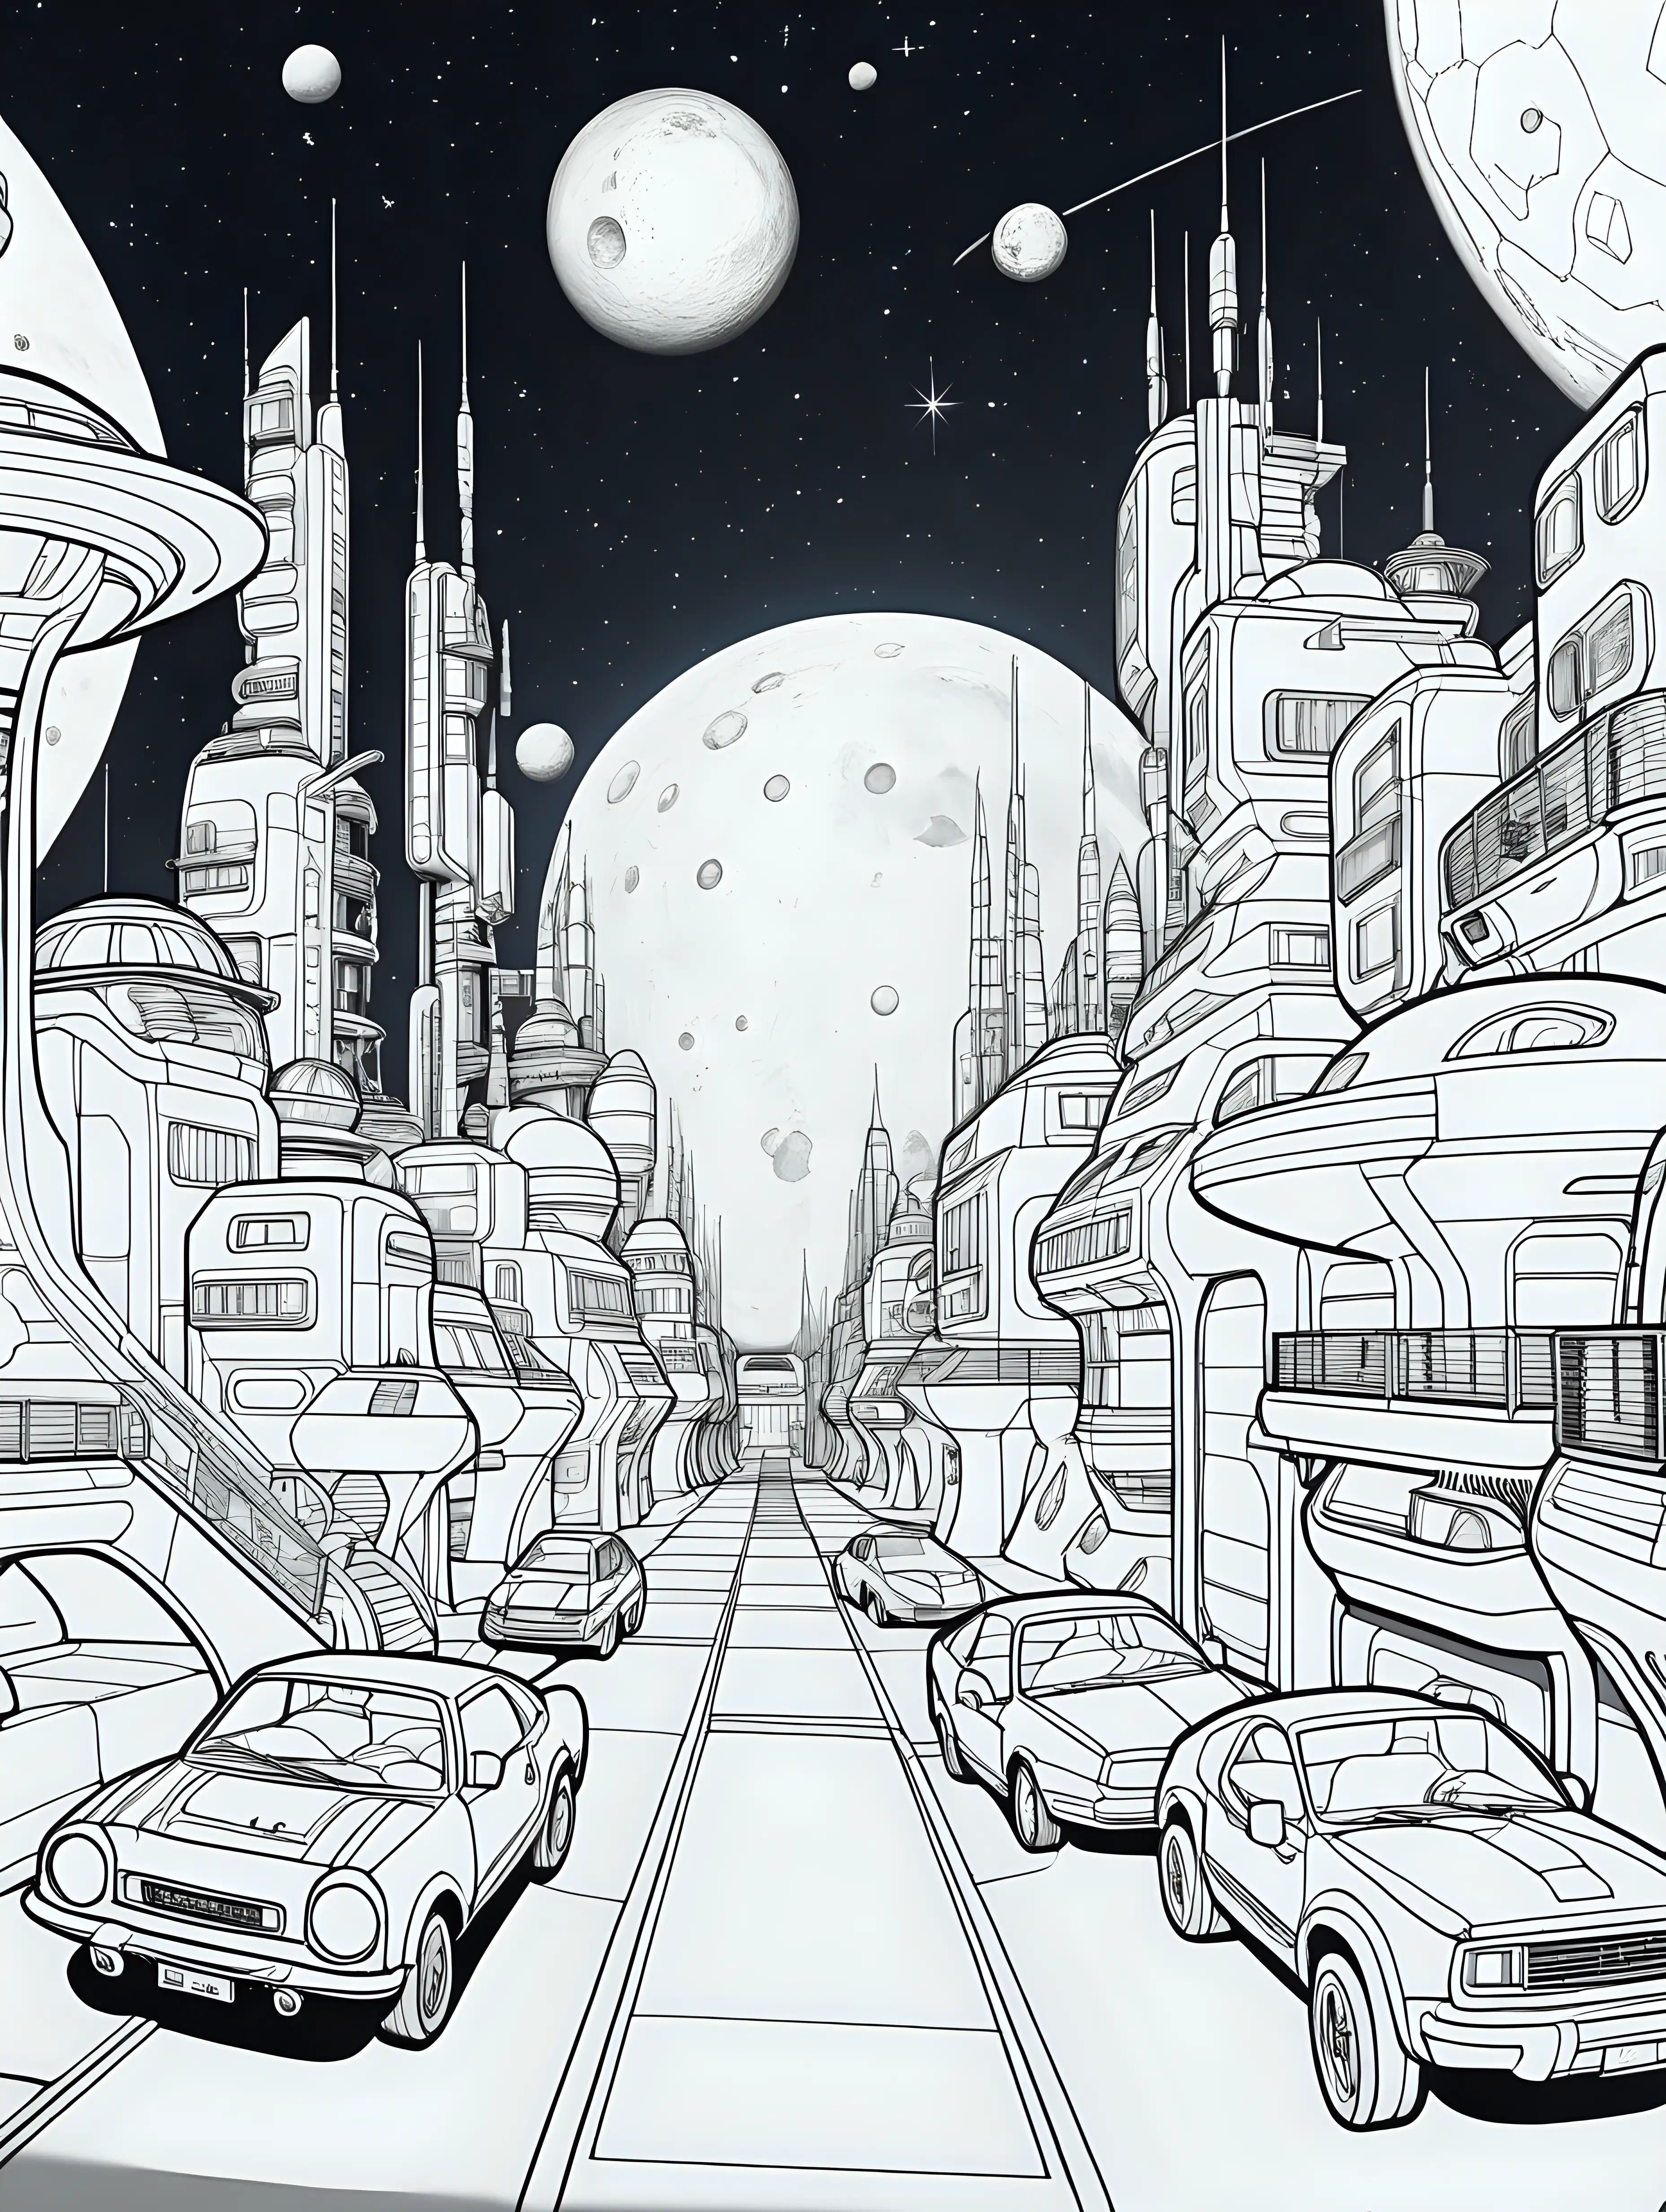 A Coloring book page, futuristic space colony on the moon, technologically advanced townhouses lined on up a street with futuristic lamps and cars in the street, you can see space and earth in the background, The lines should be simple, suitable for younger colorists.